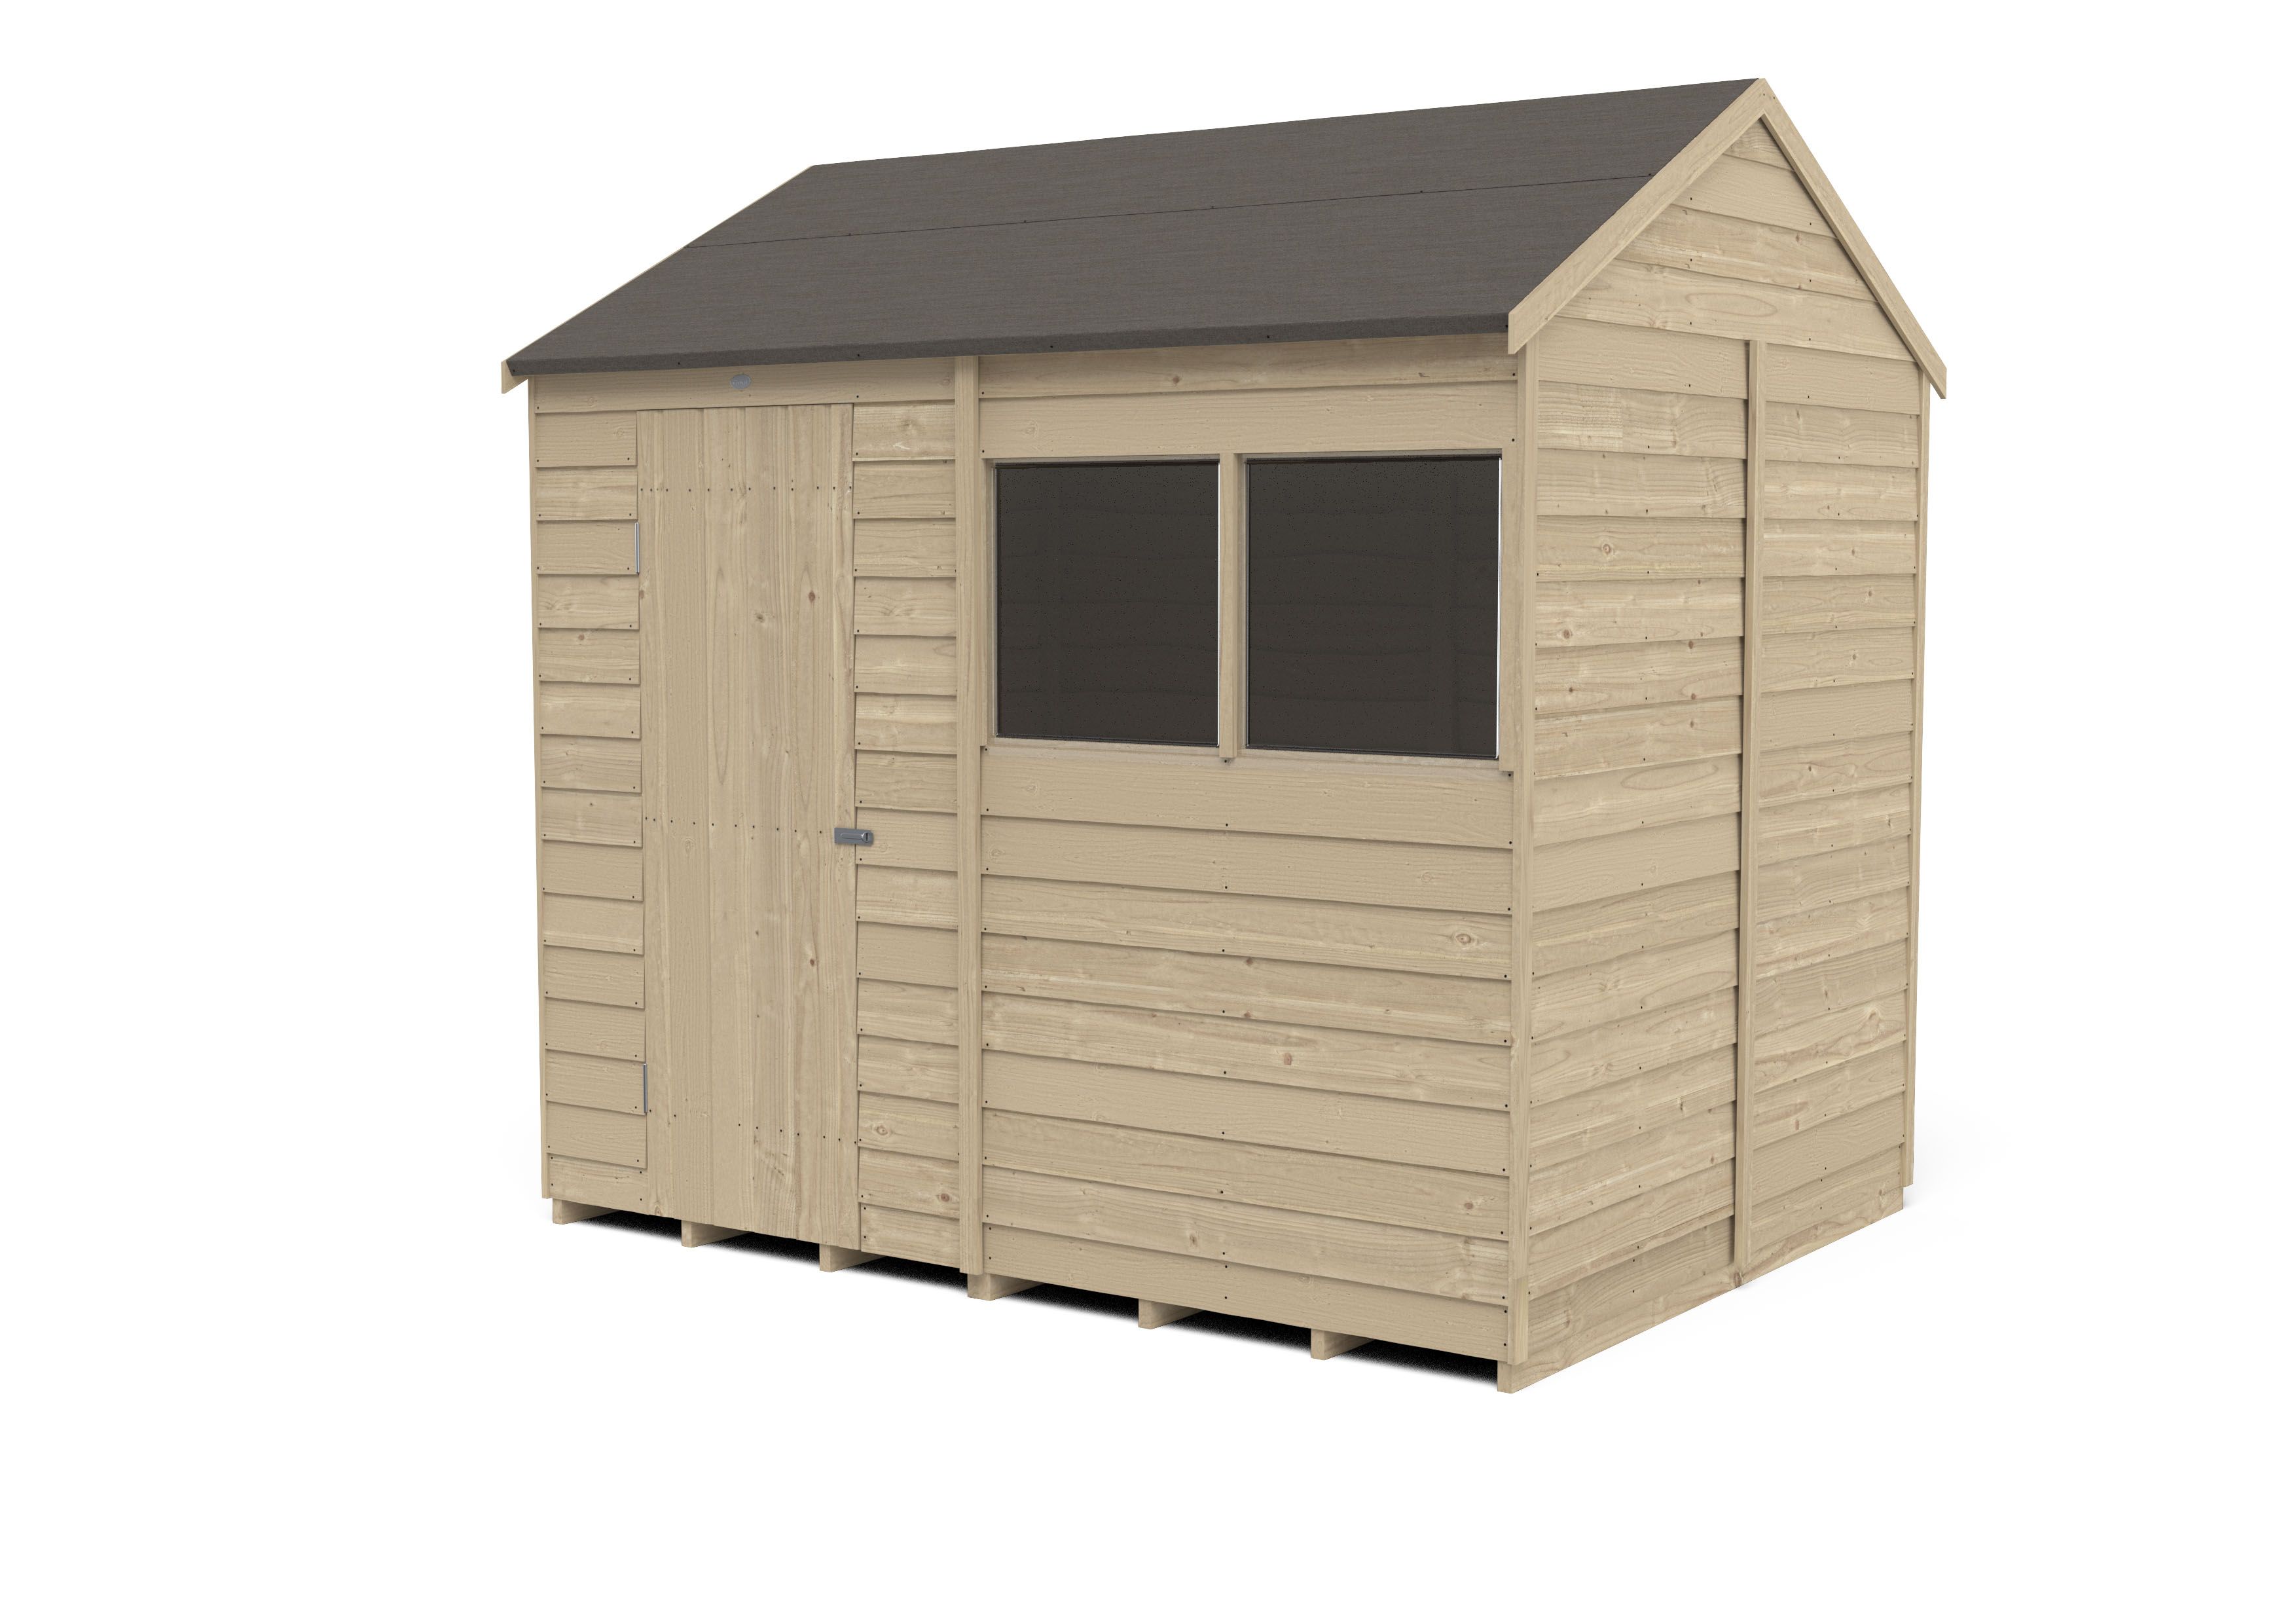 Forest Garden Overlap 8x6 ft Reverse apex Wooden Shed with floor & 2 windows (Base included) - Assembly service included